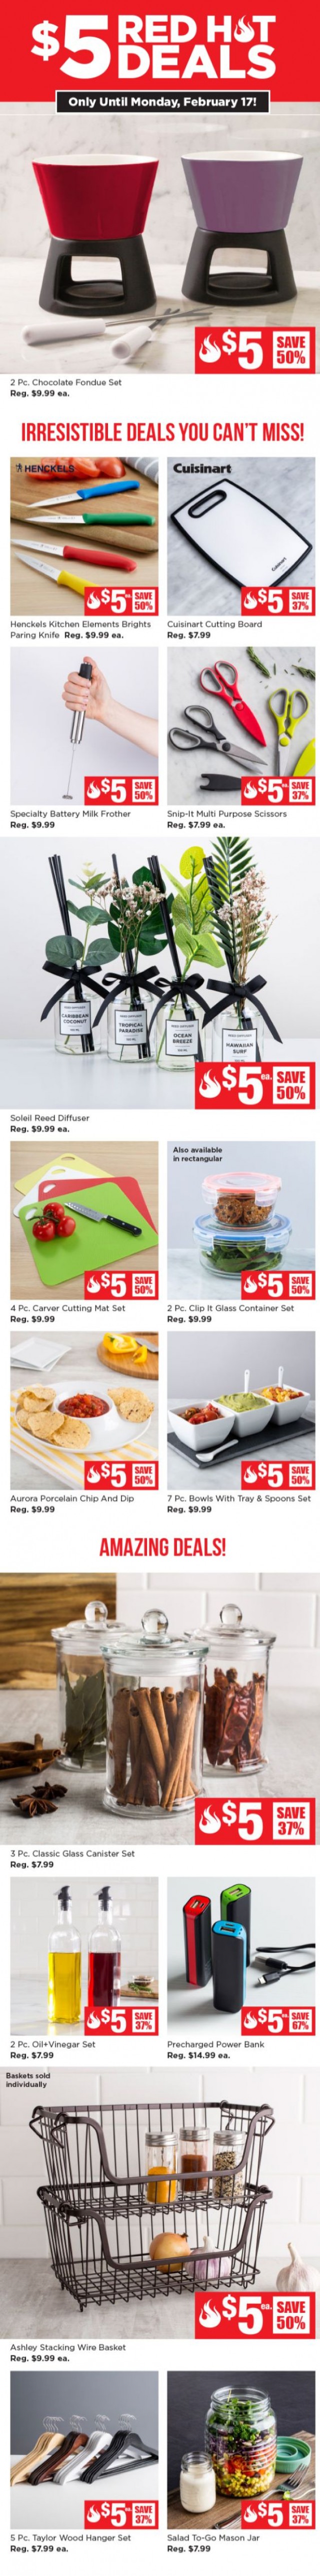 Coupon for: Kitchen Stuff Plus - $5 Red Hot Deals